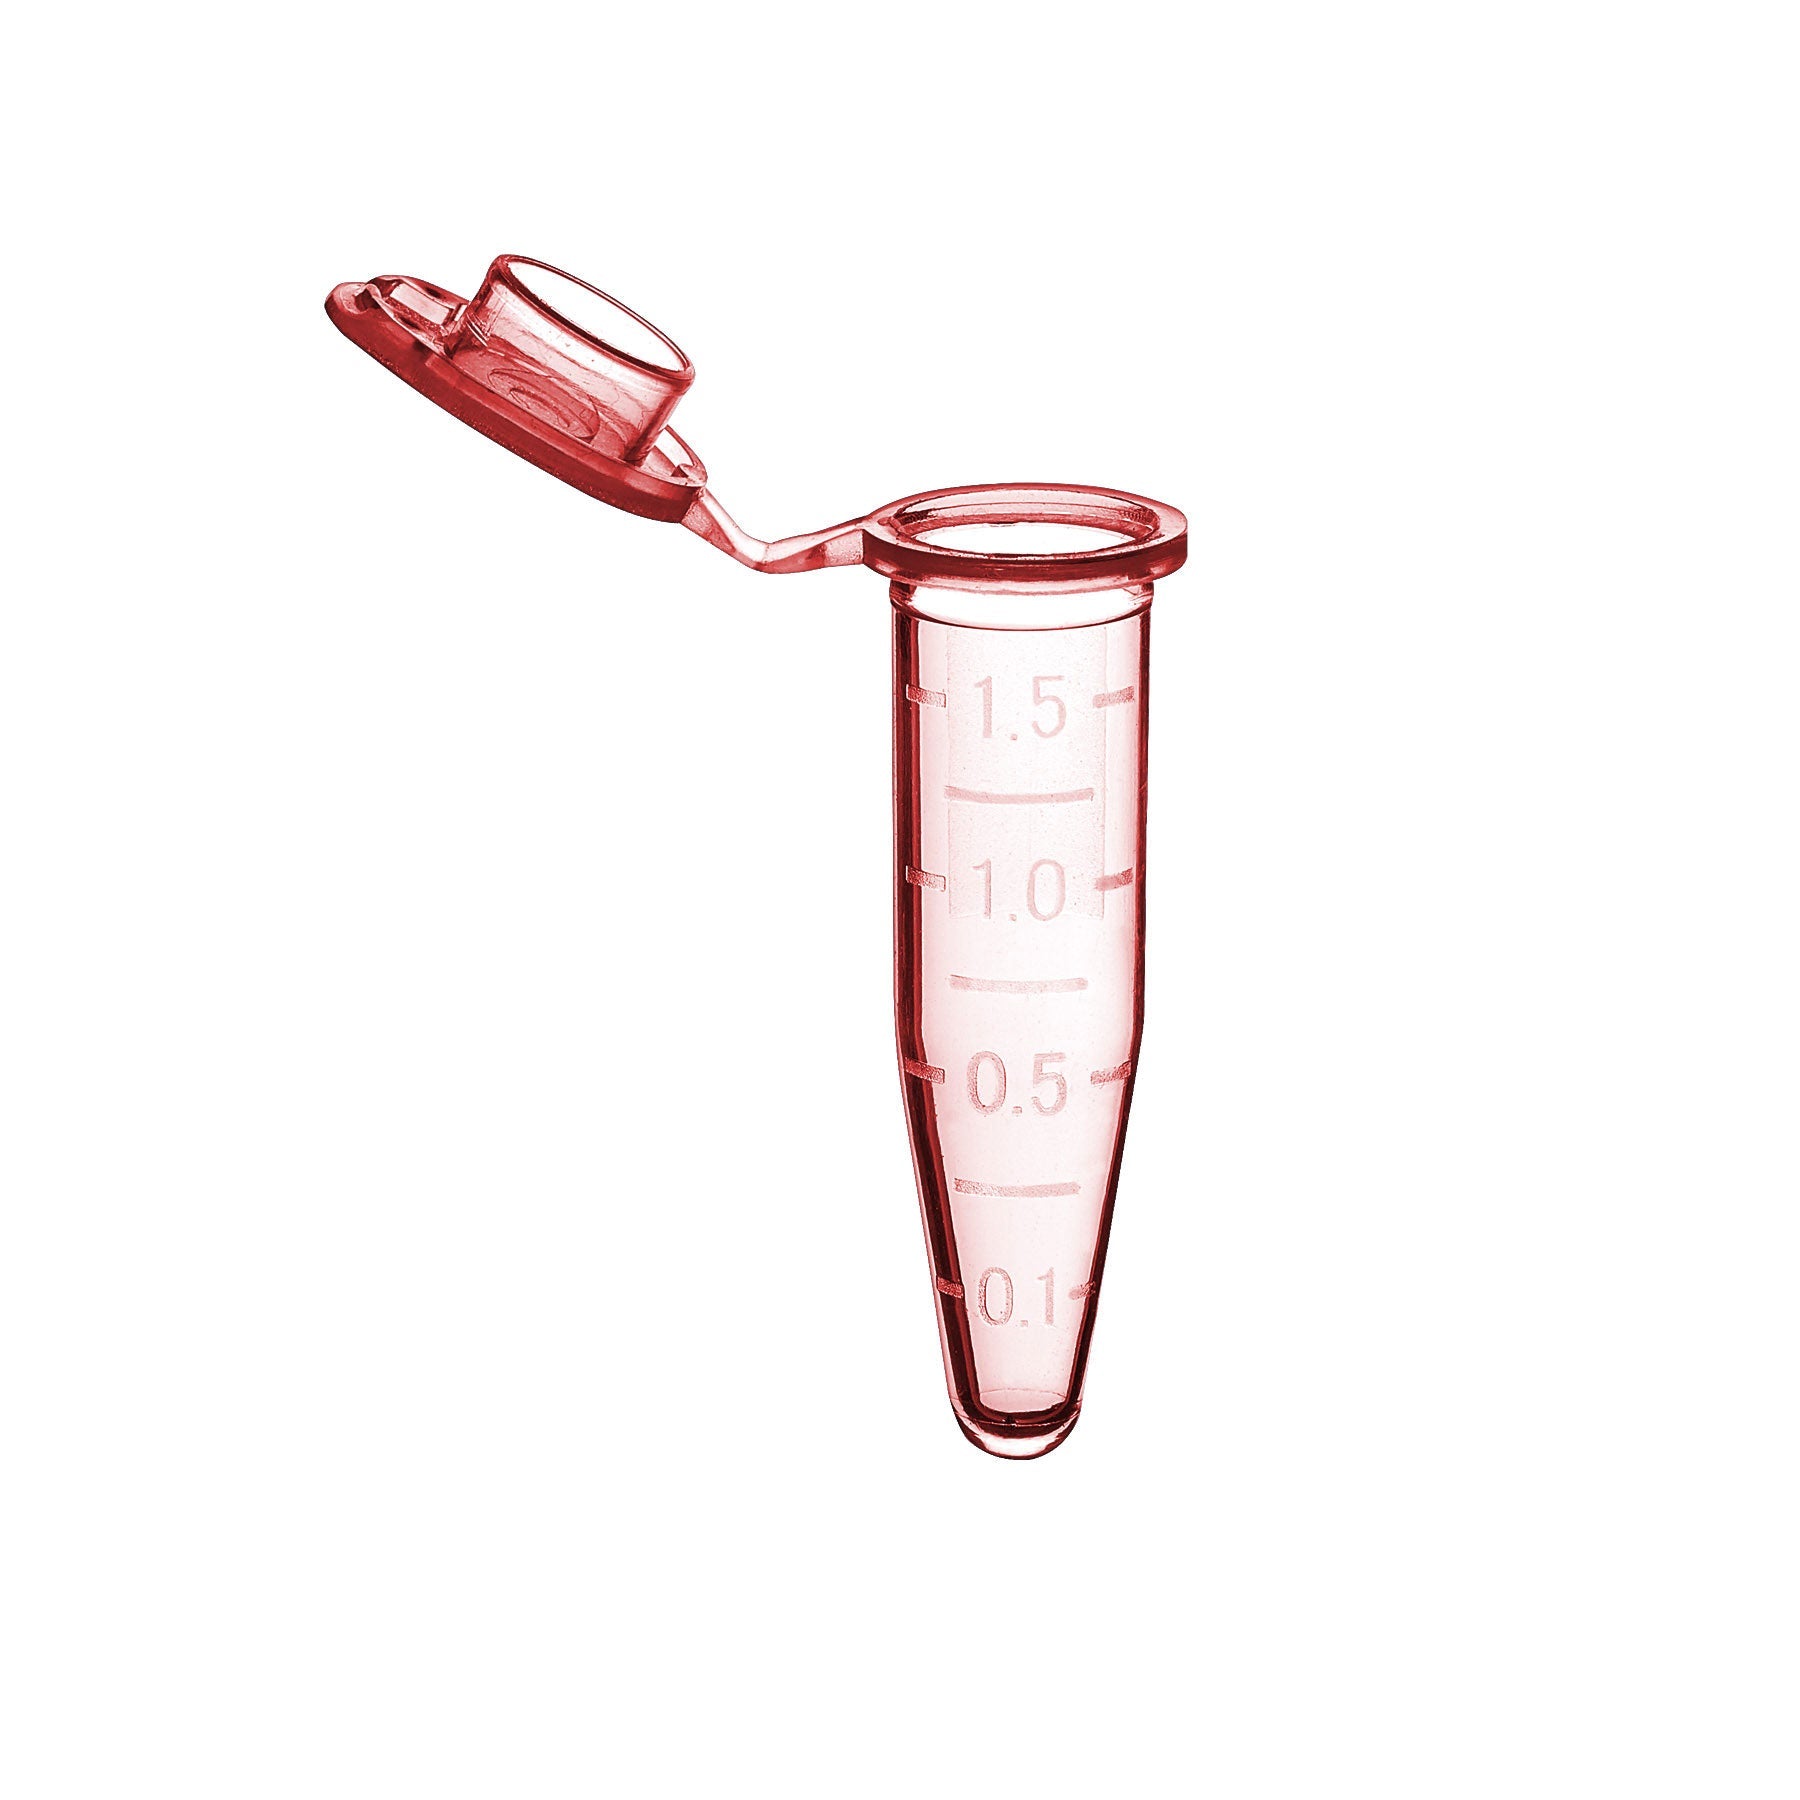 MTC Bio C2000-R, SureSeal Microcentrifuge Tube with Cap, 1.5ml, Red, Sterile, with Self-Standing Bag & Stop-Pops, 500/pk